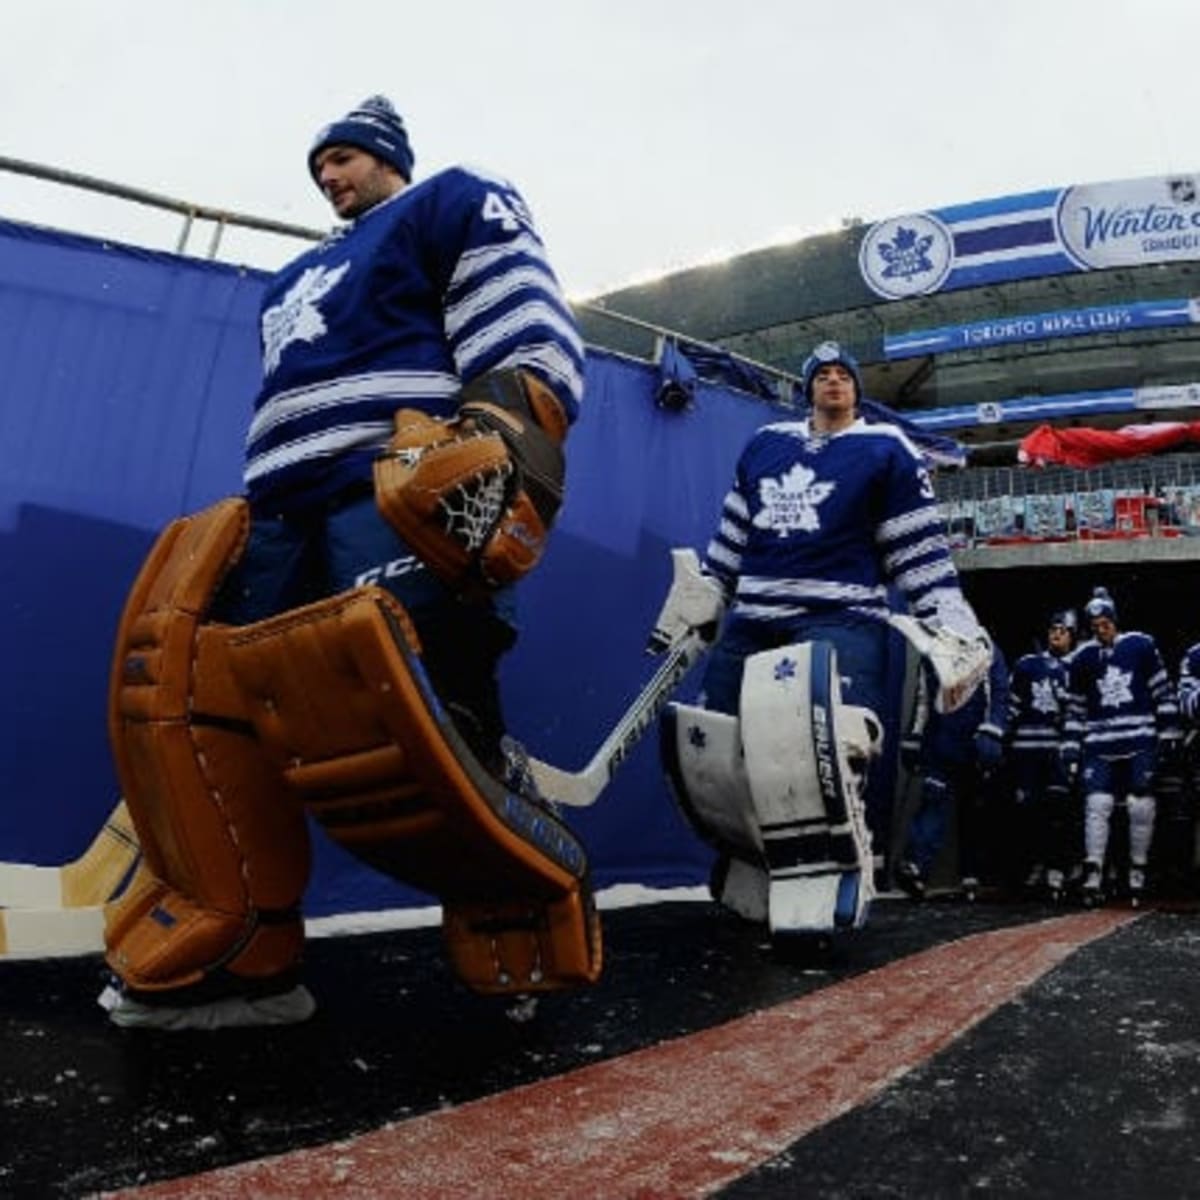 How to watch Red Wings vs. Leafs in Centennial Classic outdoor game